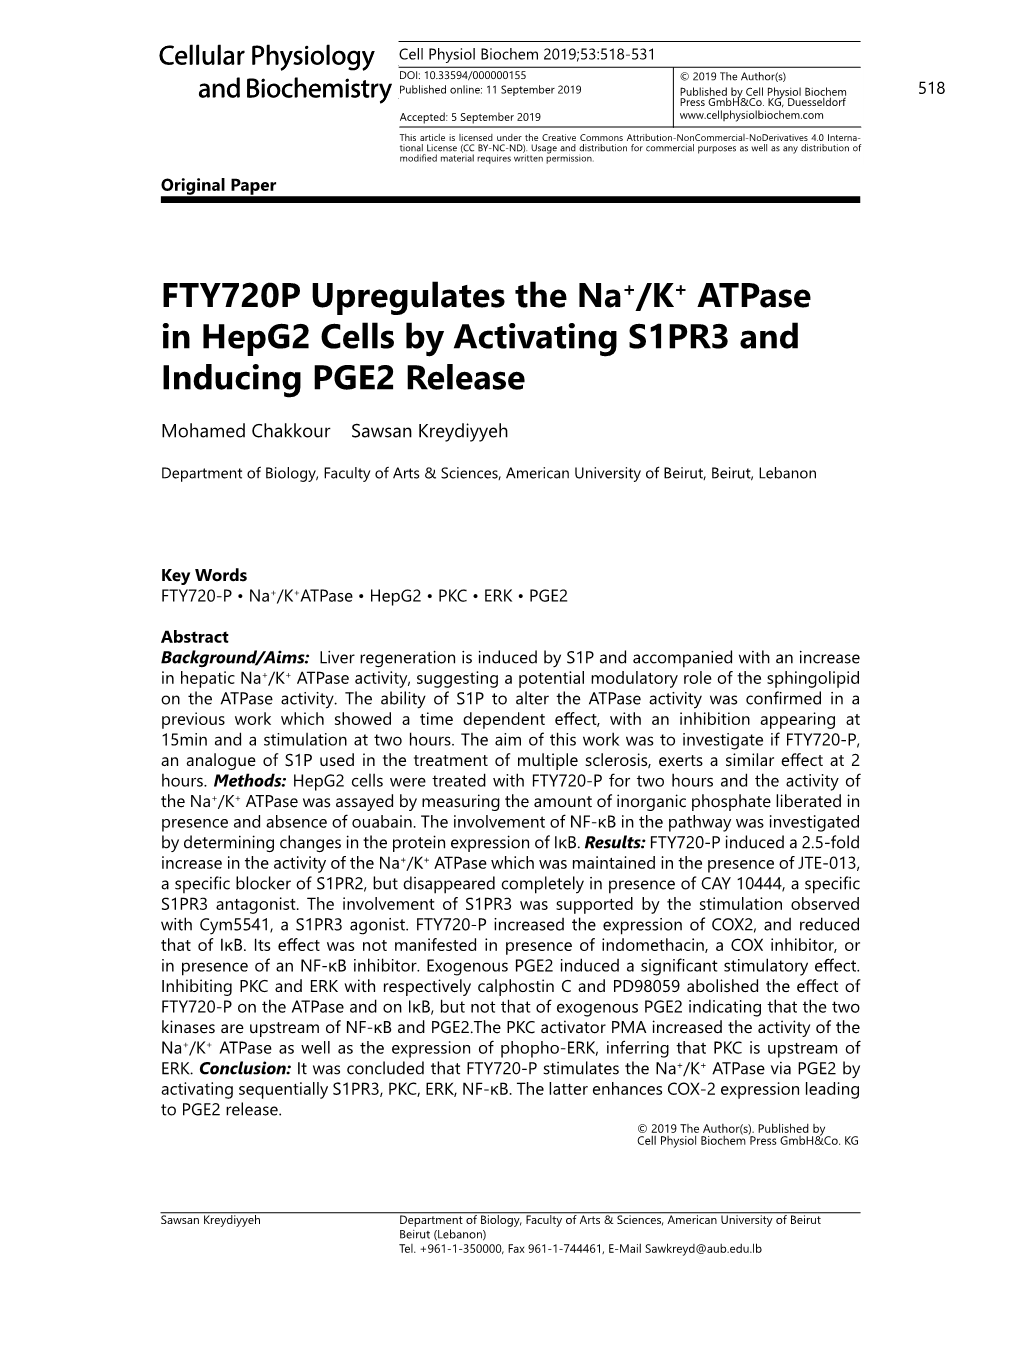 FTY720P Upregulates the Na+/K+ Atpase in Hepg2 Cells by Activating S1PR3 and Inducing PGE2 Release